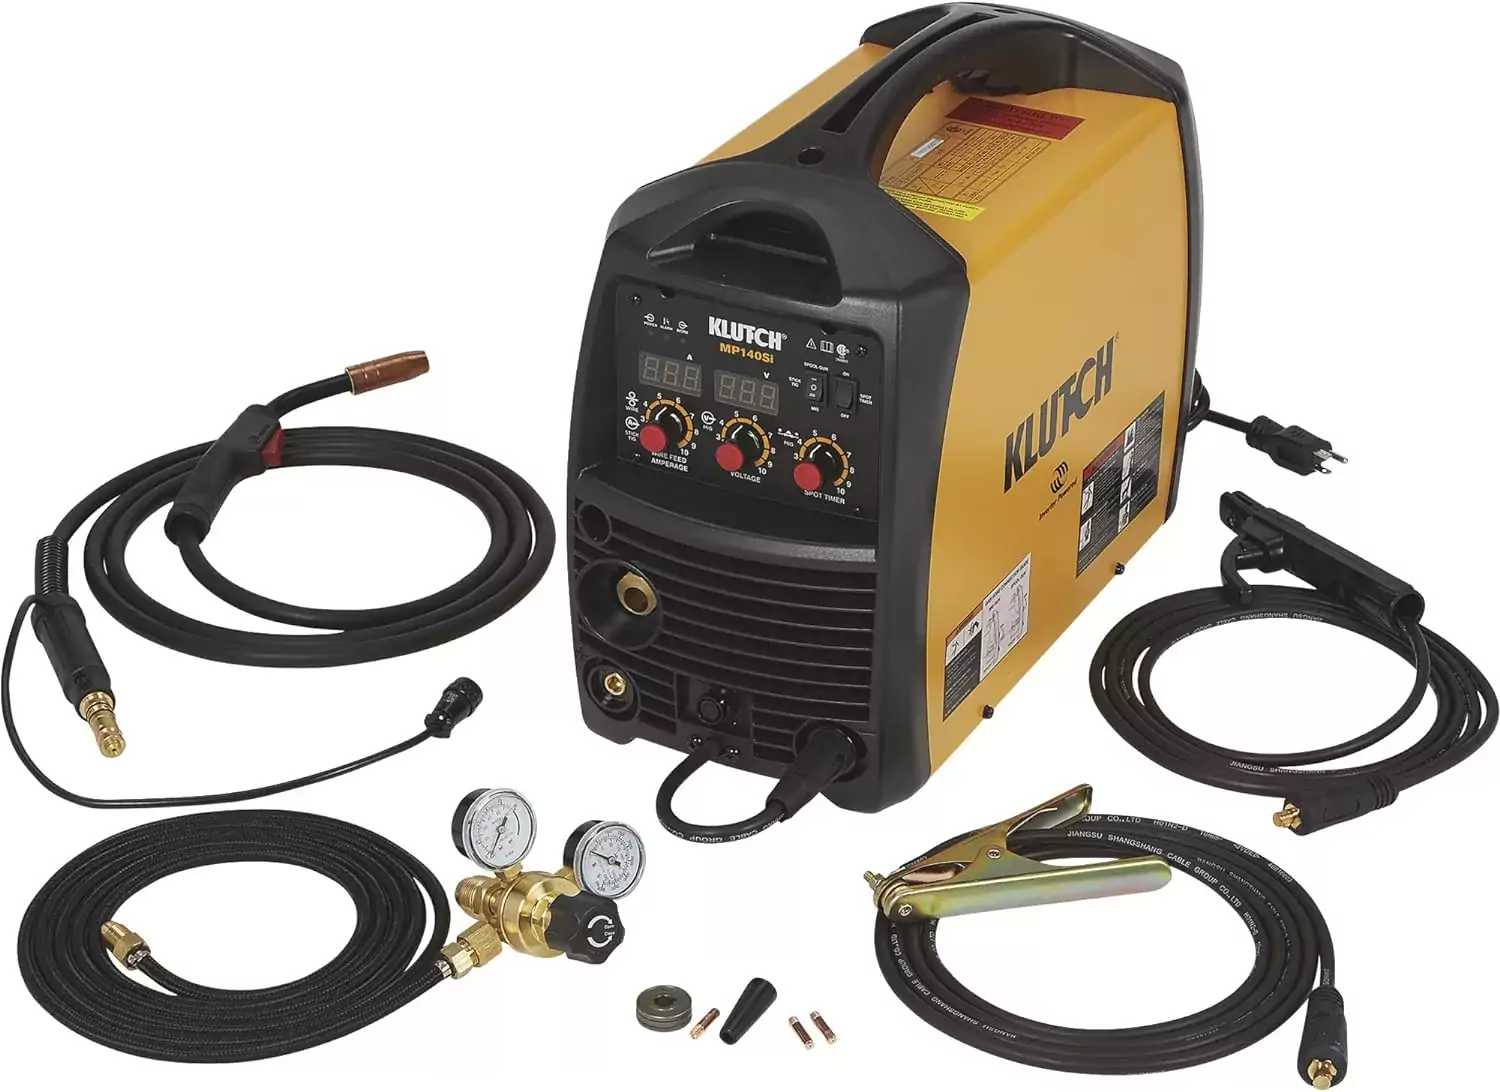 
Klutch MIG Welder with Multi Processes